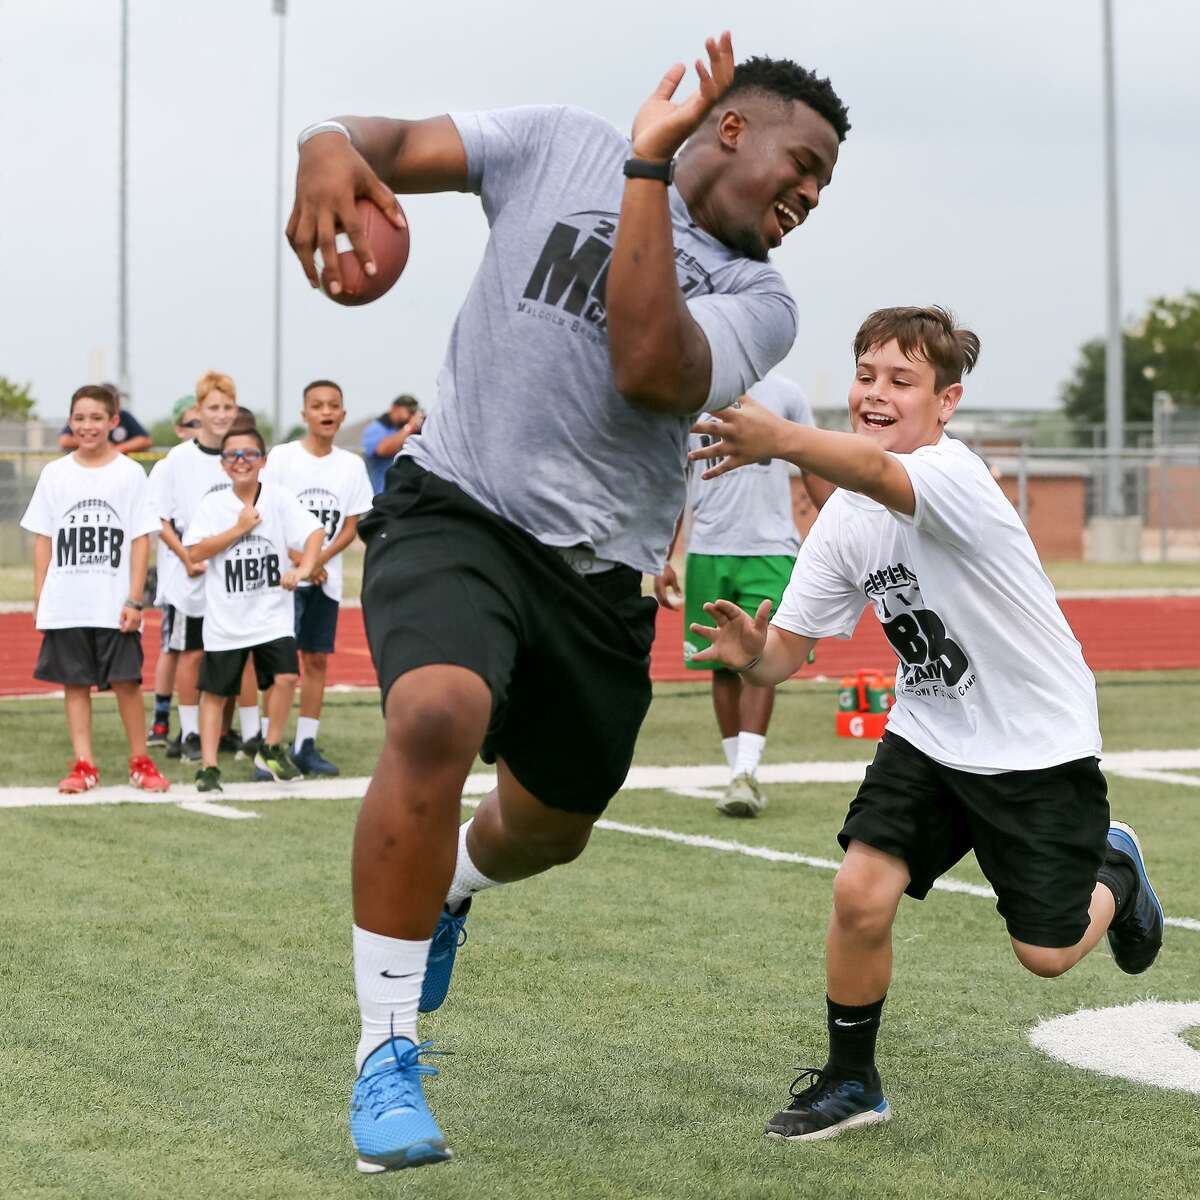 Tyler Drake, 10, tries to catch Malcolm Brown in a running back drill at the Malcom Brown Youth Football Camp where the Los Angeles Rams' running back and other NFL and college players taught leadership and football skills to kids ages 6-13 at Steele High School on Saturday, June 24, 2017.